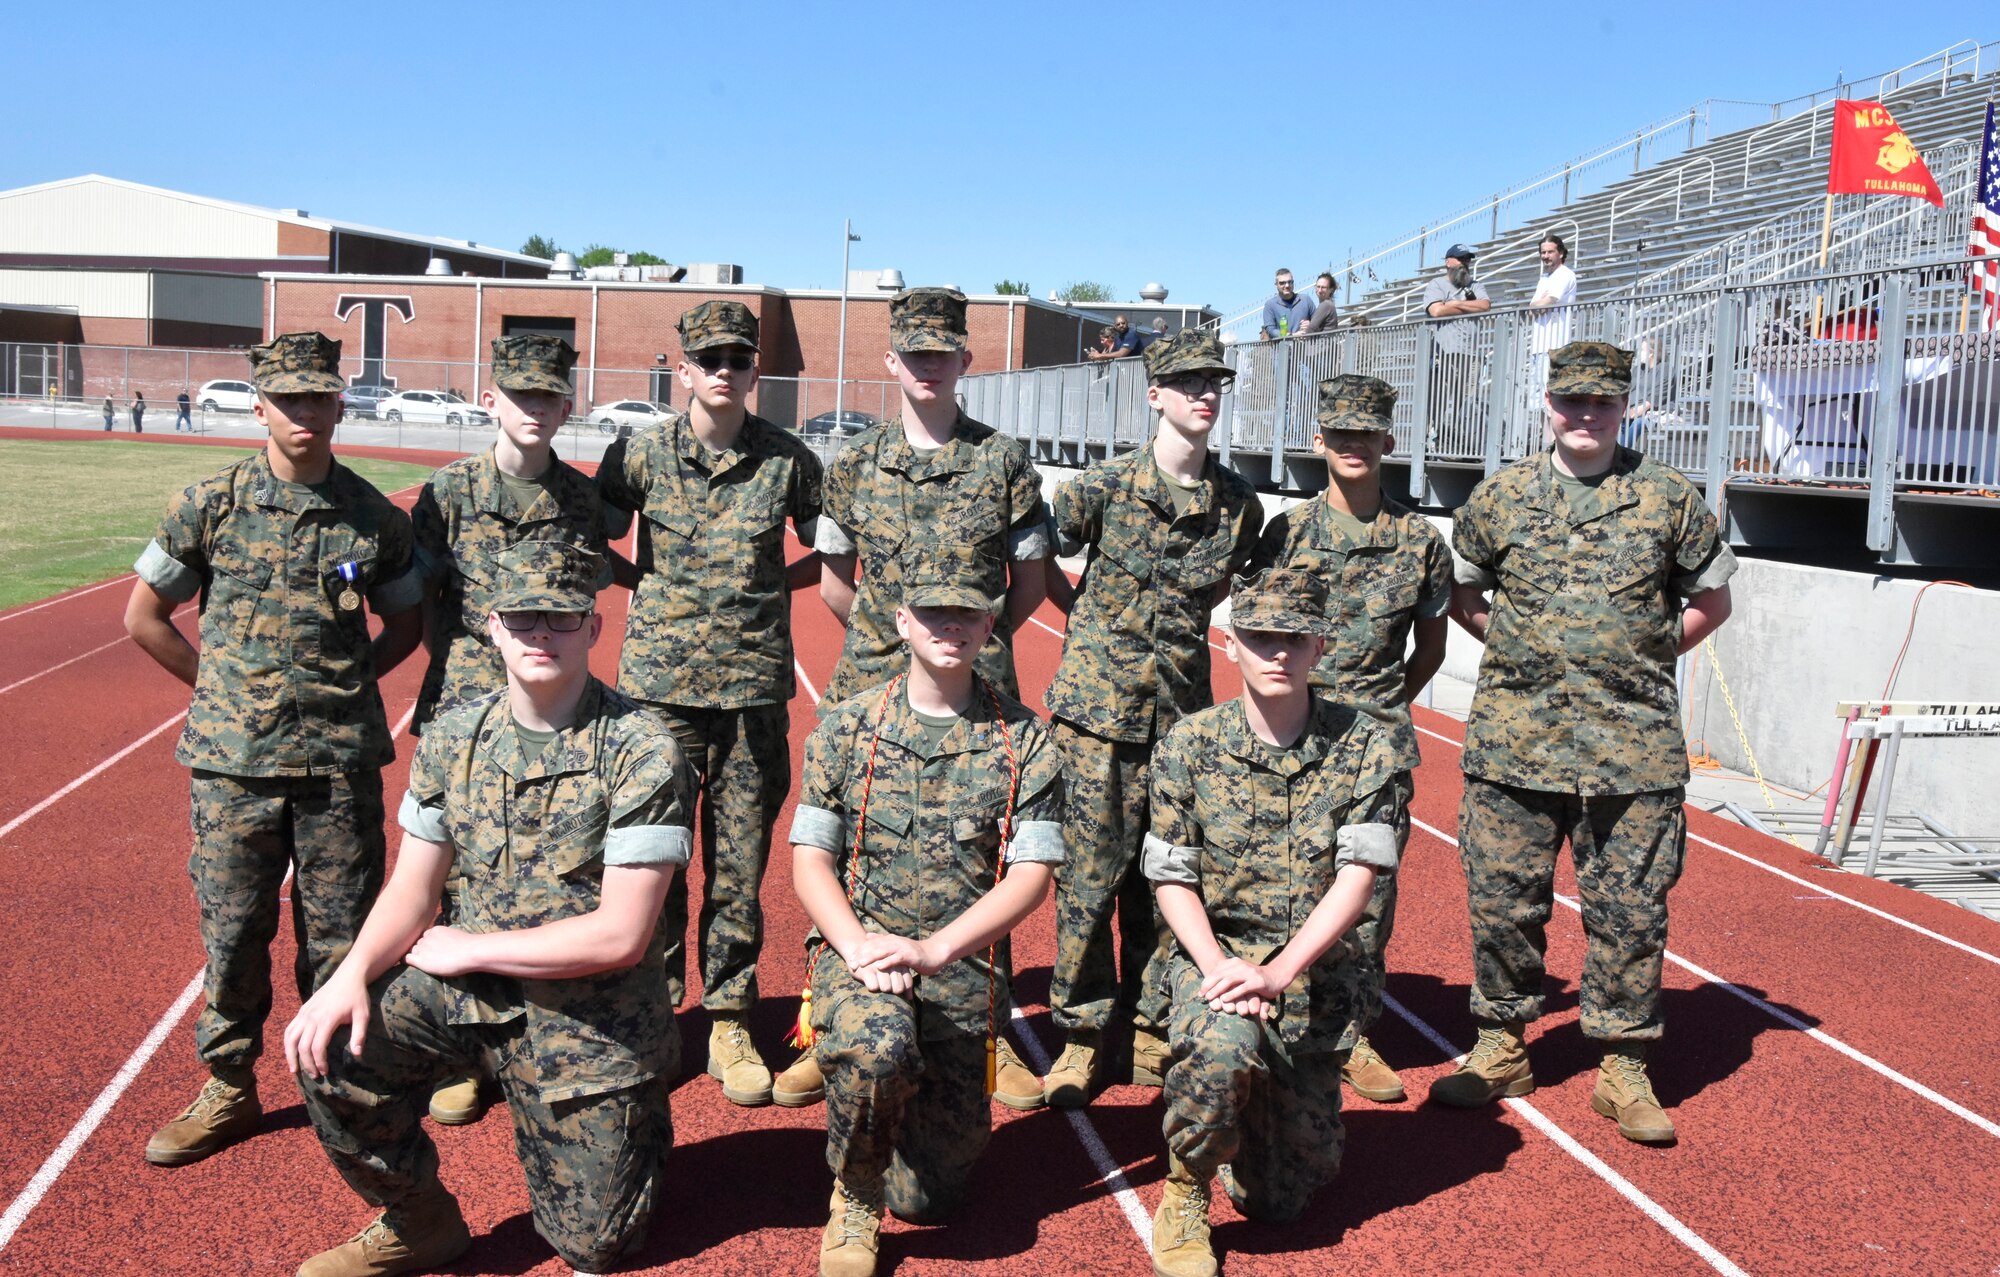 Pictured are members of this year’s Tullahoma High School Marine Corps Junior ROTC CyberPatriot team at the high school, May 6, 2021. Pictured back row from left are: Julian Taylor, Jaydon Lee, Ethan Simmons, Kaden Baker, Mason LeMay, Anthony Lelez and John Young. Pictured front row from left are: Deekan Wilson, Zachary Wirth (team captain) and Gavin Jones. (U.S. Air Force photo by Bradley Hicks)